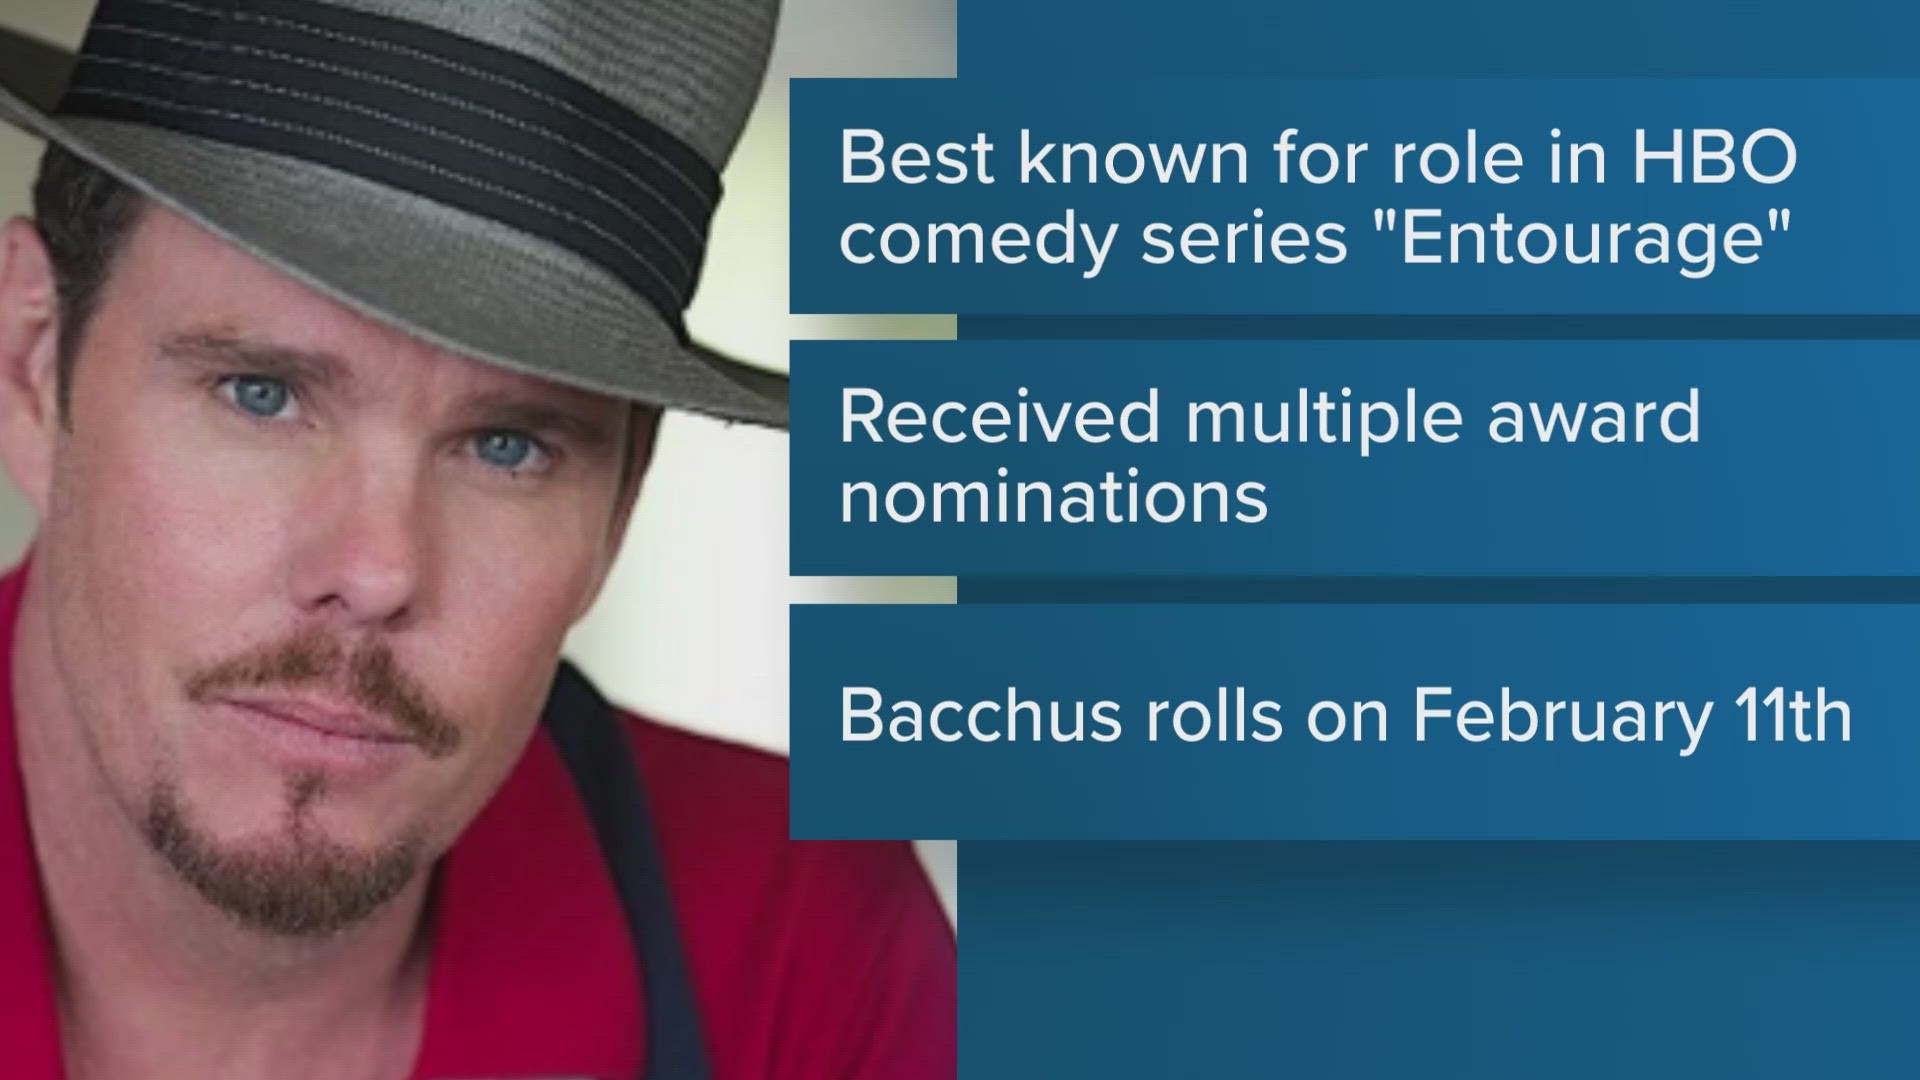 Kevin Dillon will reign as Bacchus.